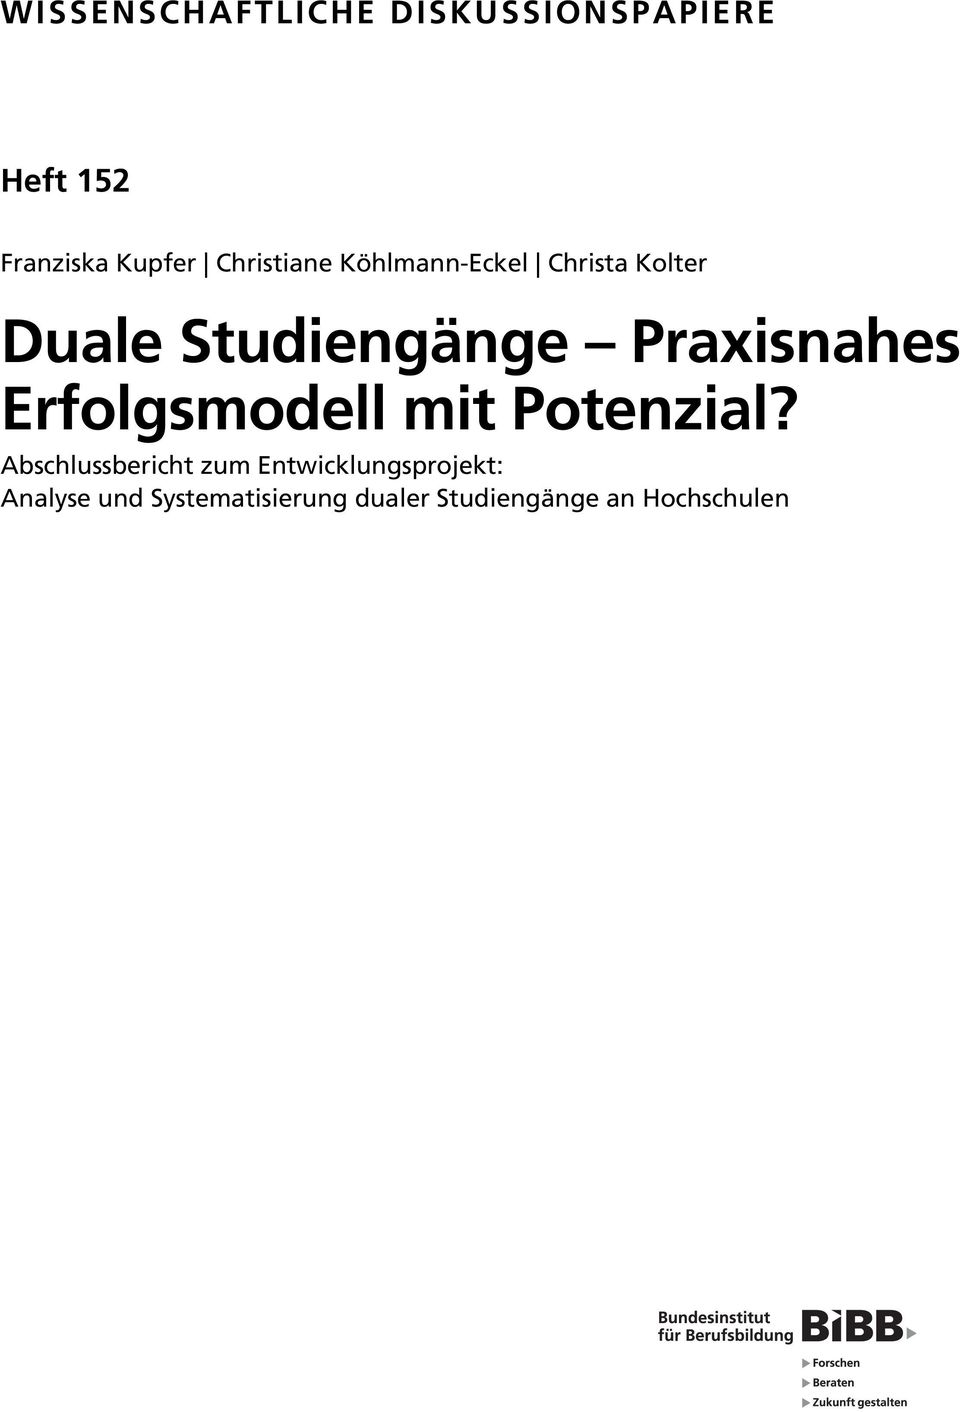 Praxisnahes Erfolgsmodell mit Potenzial?